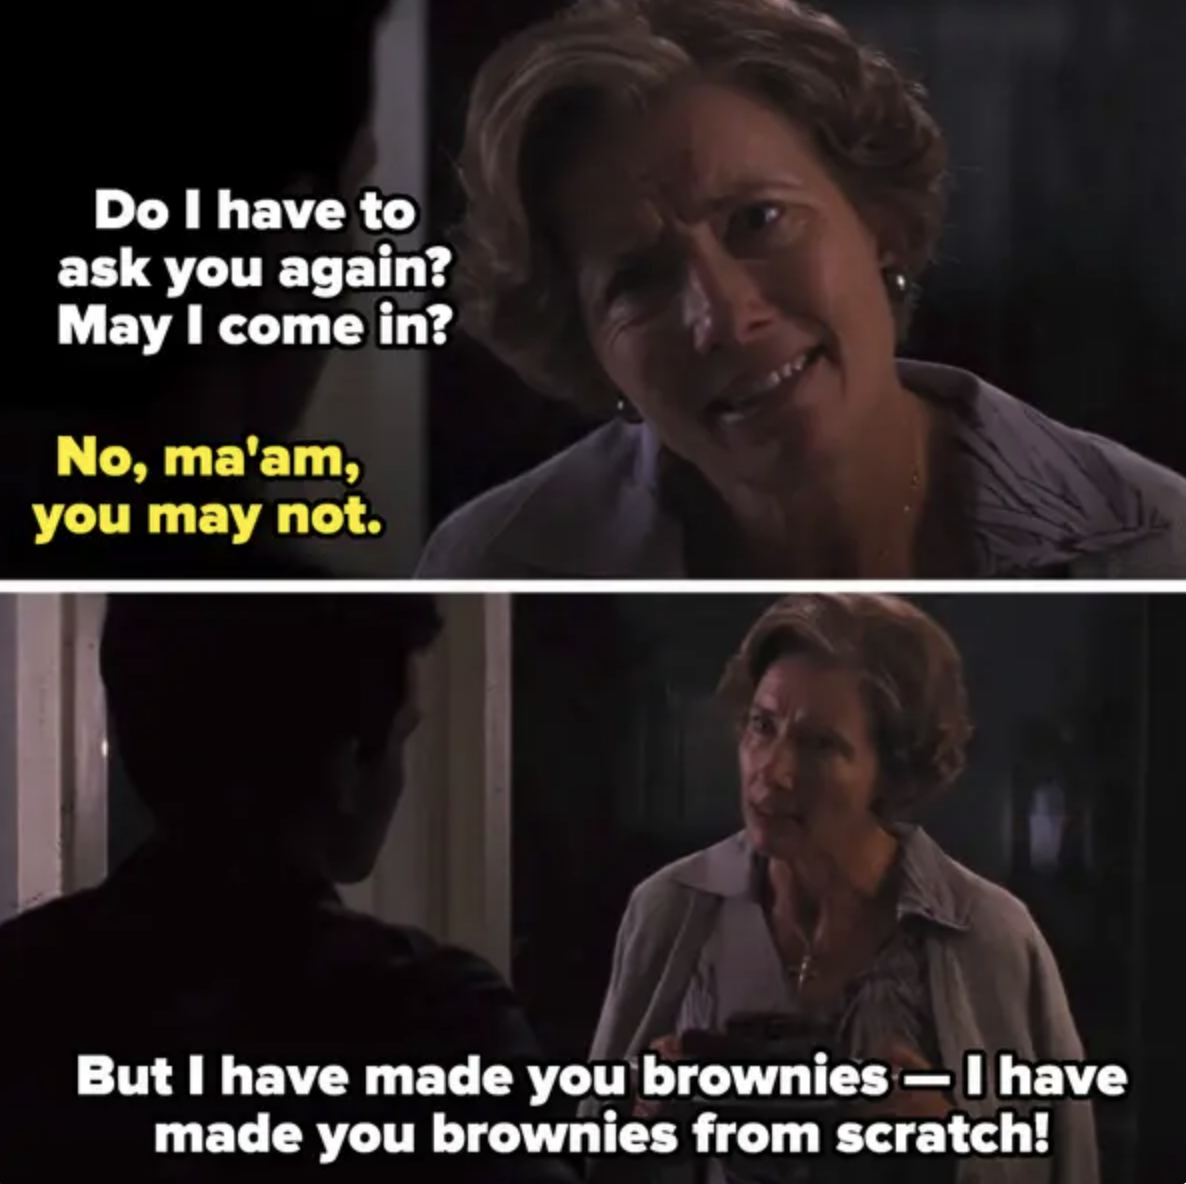 A woman asking if she can come in and when the person says no, she says she made them brownies